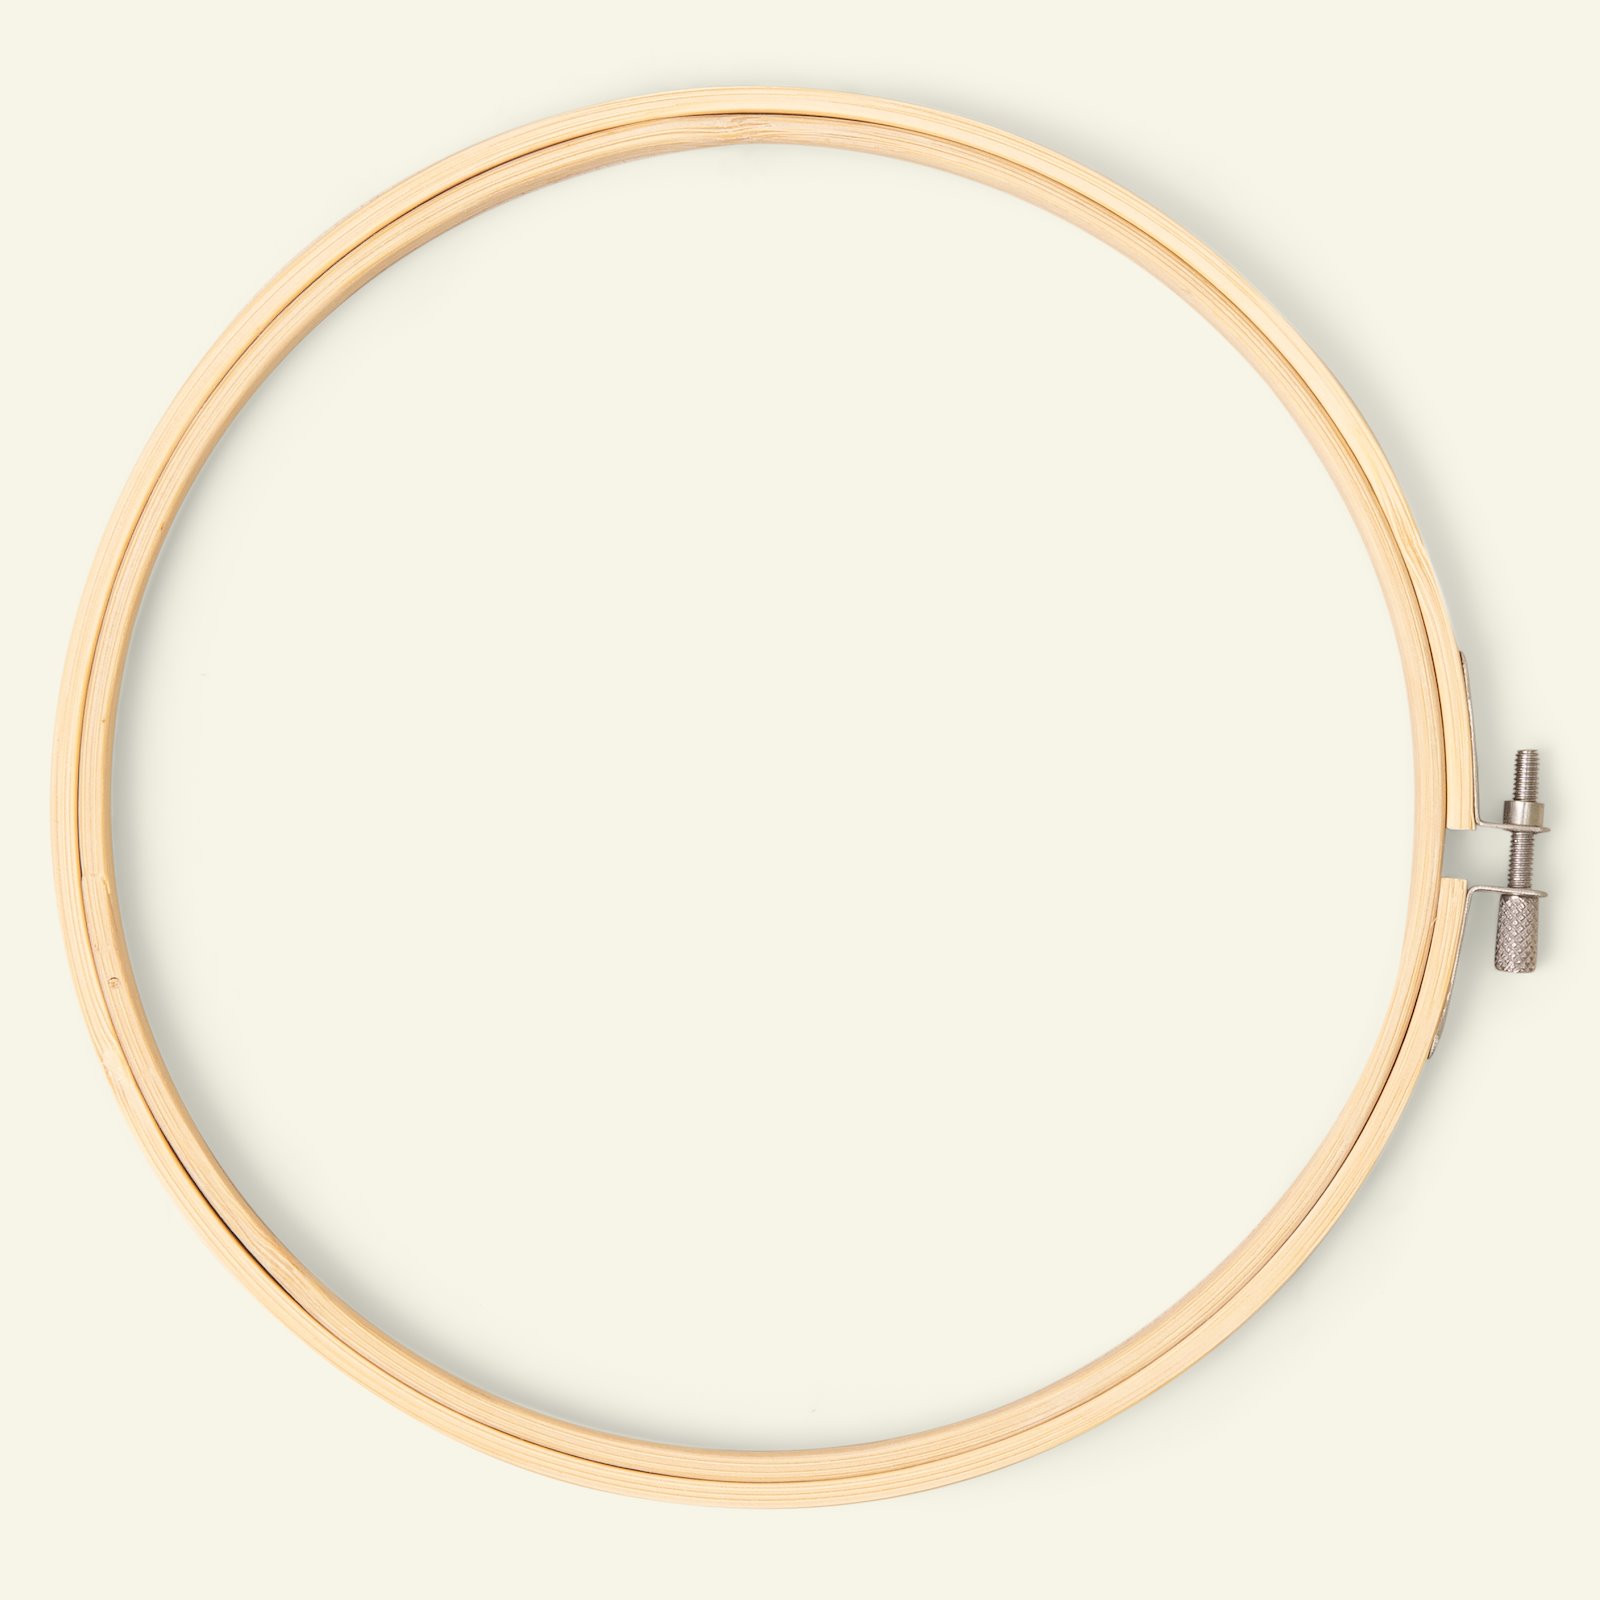 Embroidery hoop 8" - 20,8cm bamboo wood 99006_pack